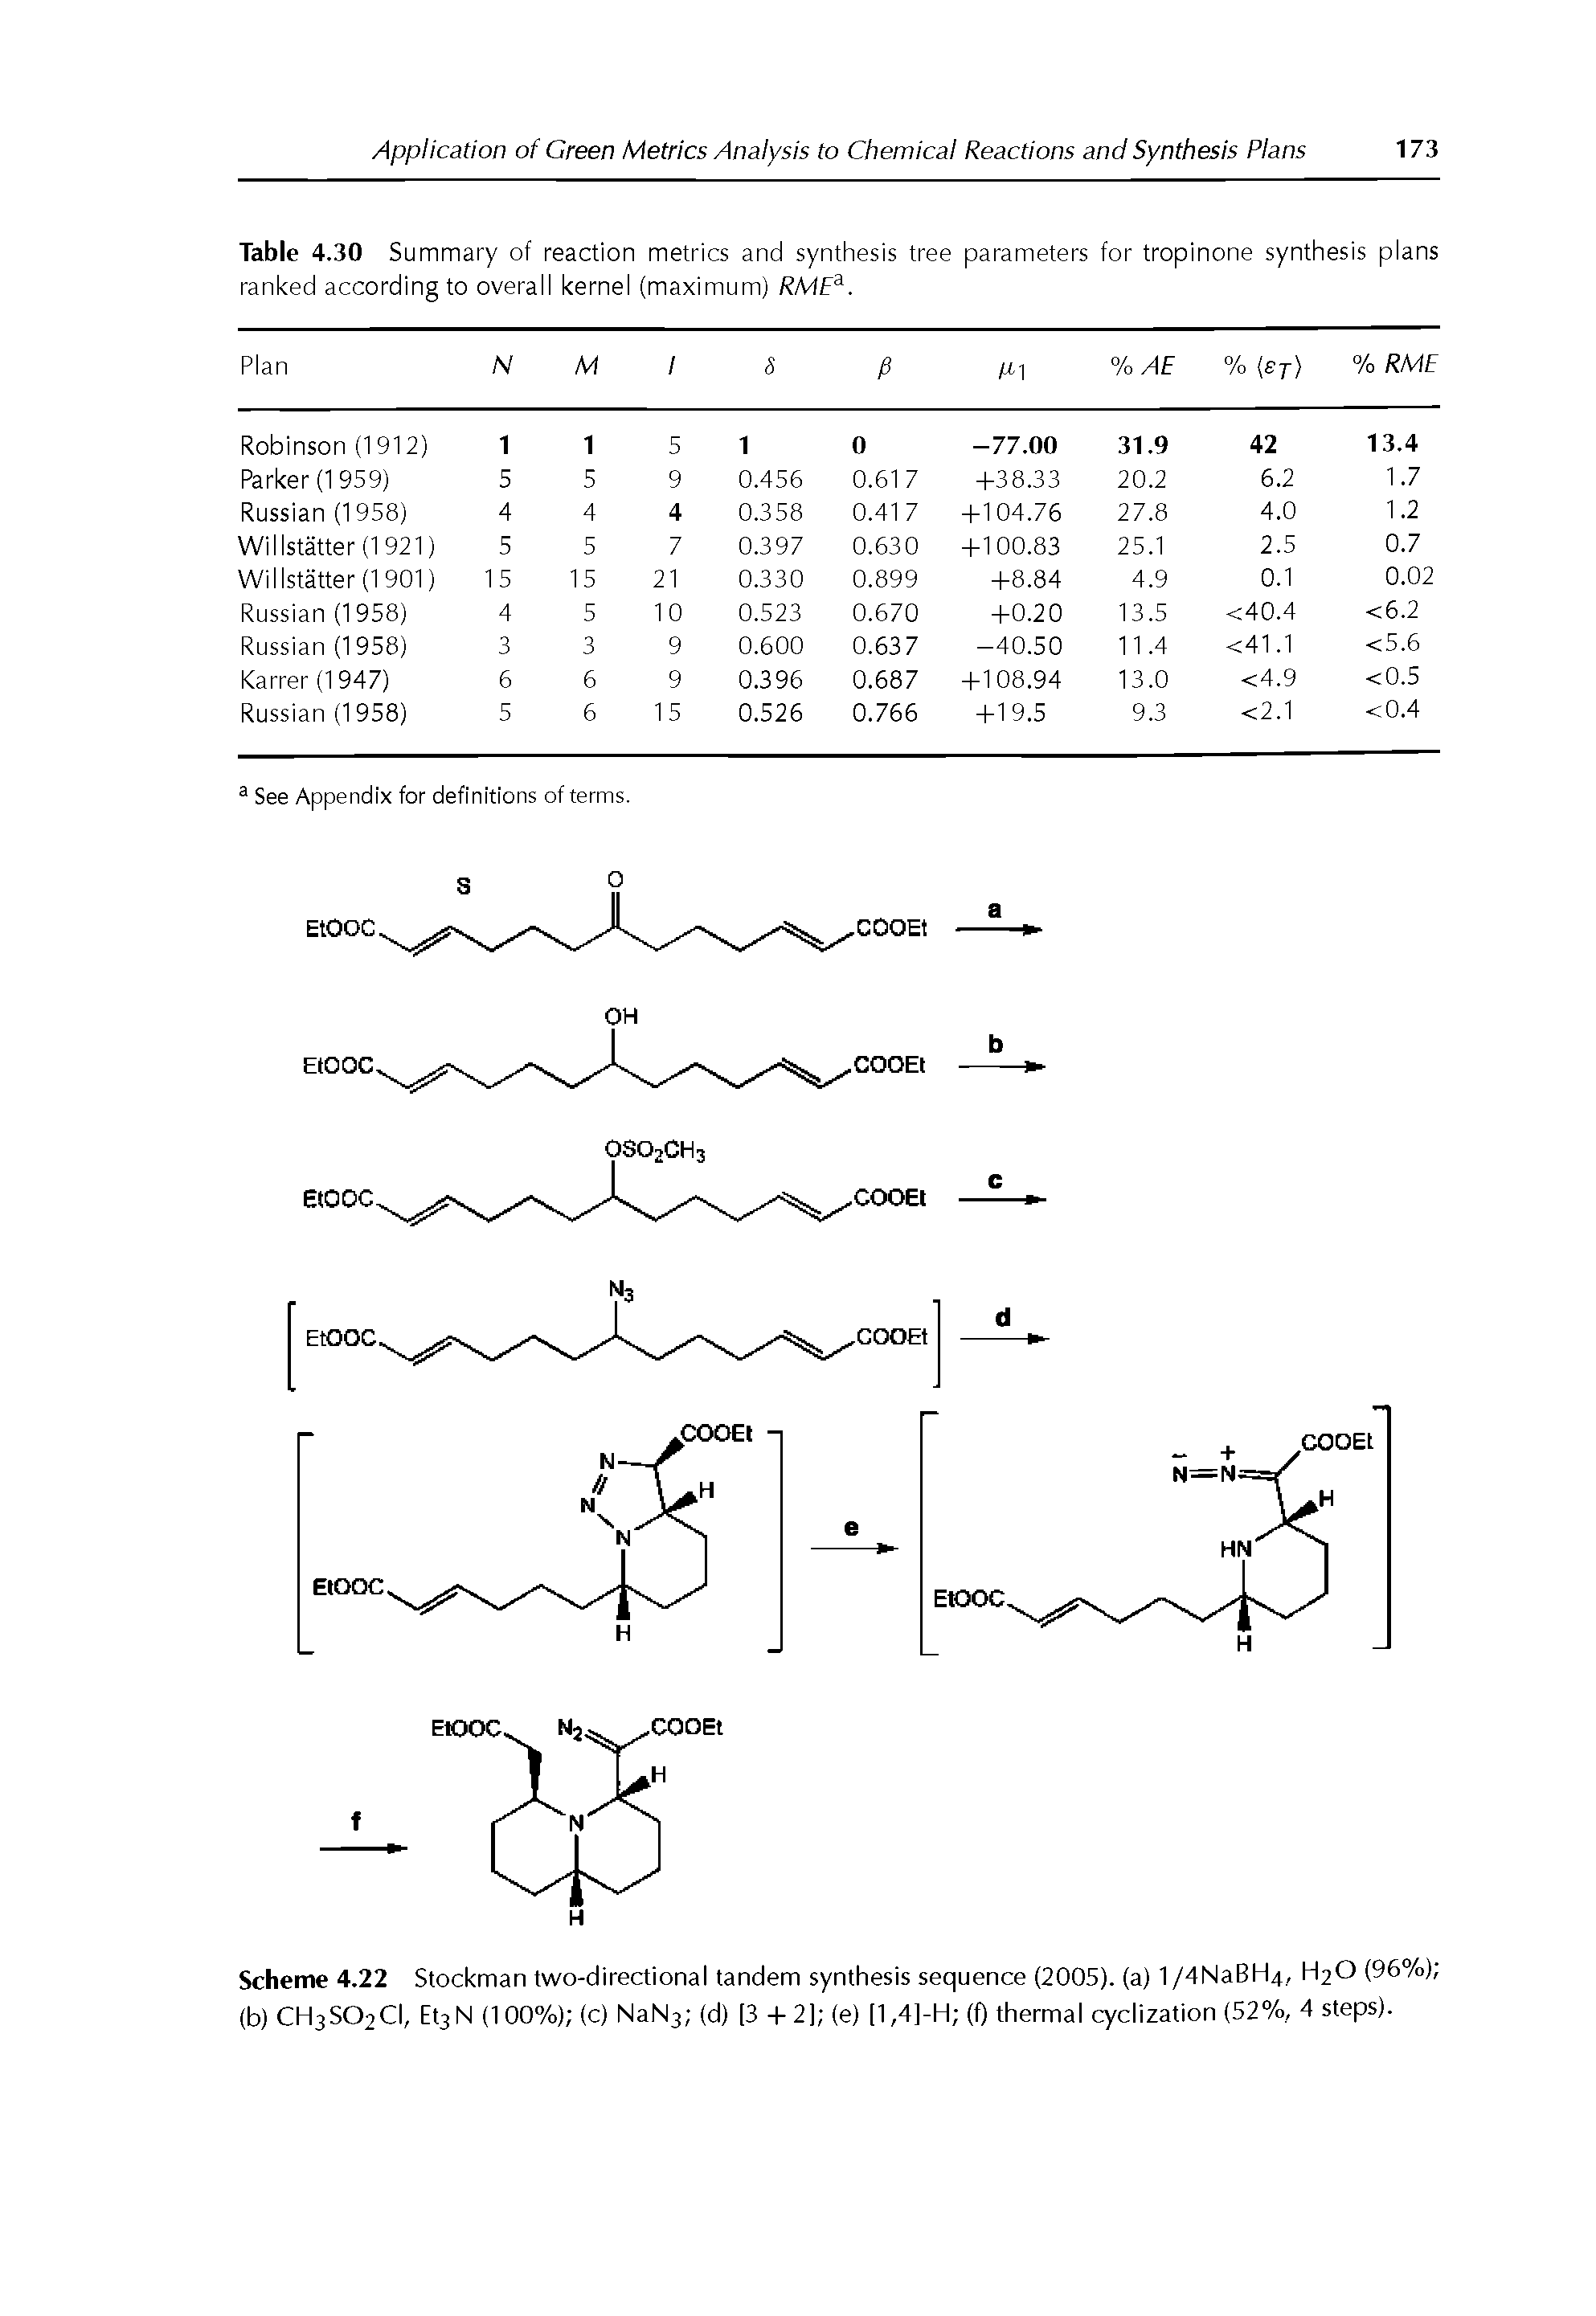 Scheme 4.22 Stockman two-directional tandem synthesis sequence (2005). (a) 1 /4NaBH4, H2O (95%), (b) CH3SO2CI, Et3N (100%) (c) NaN3 (d) [3 -1-2] (e) [1,4]-H (f) thermal cyclization (52%, 4 steps).